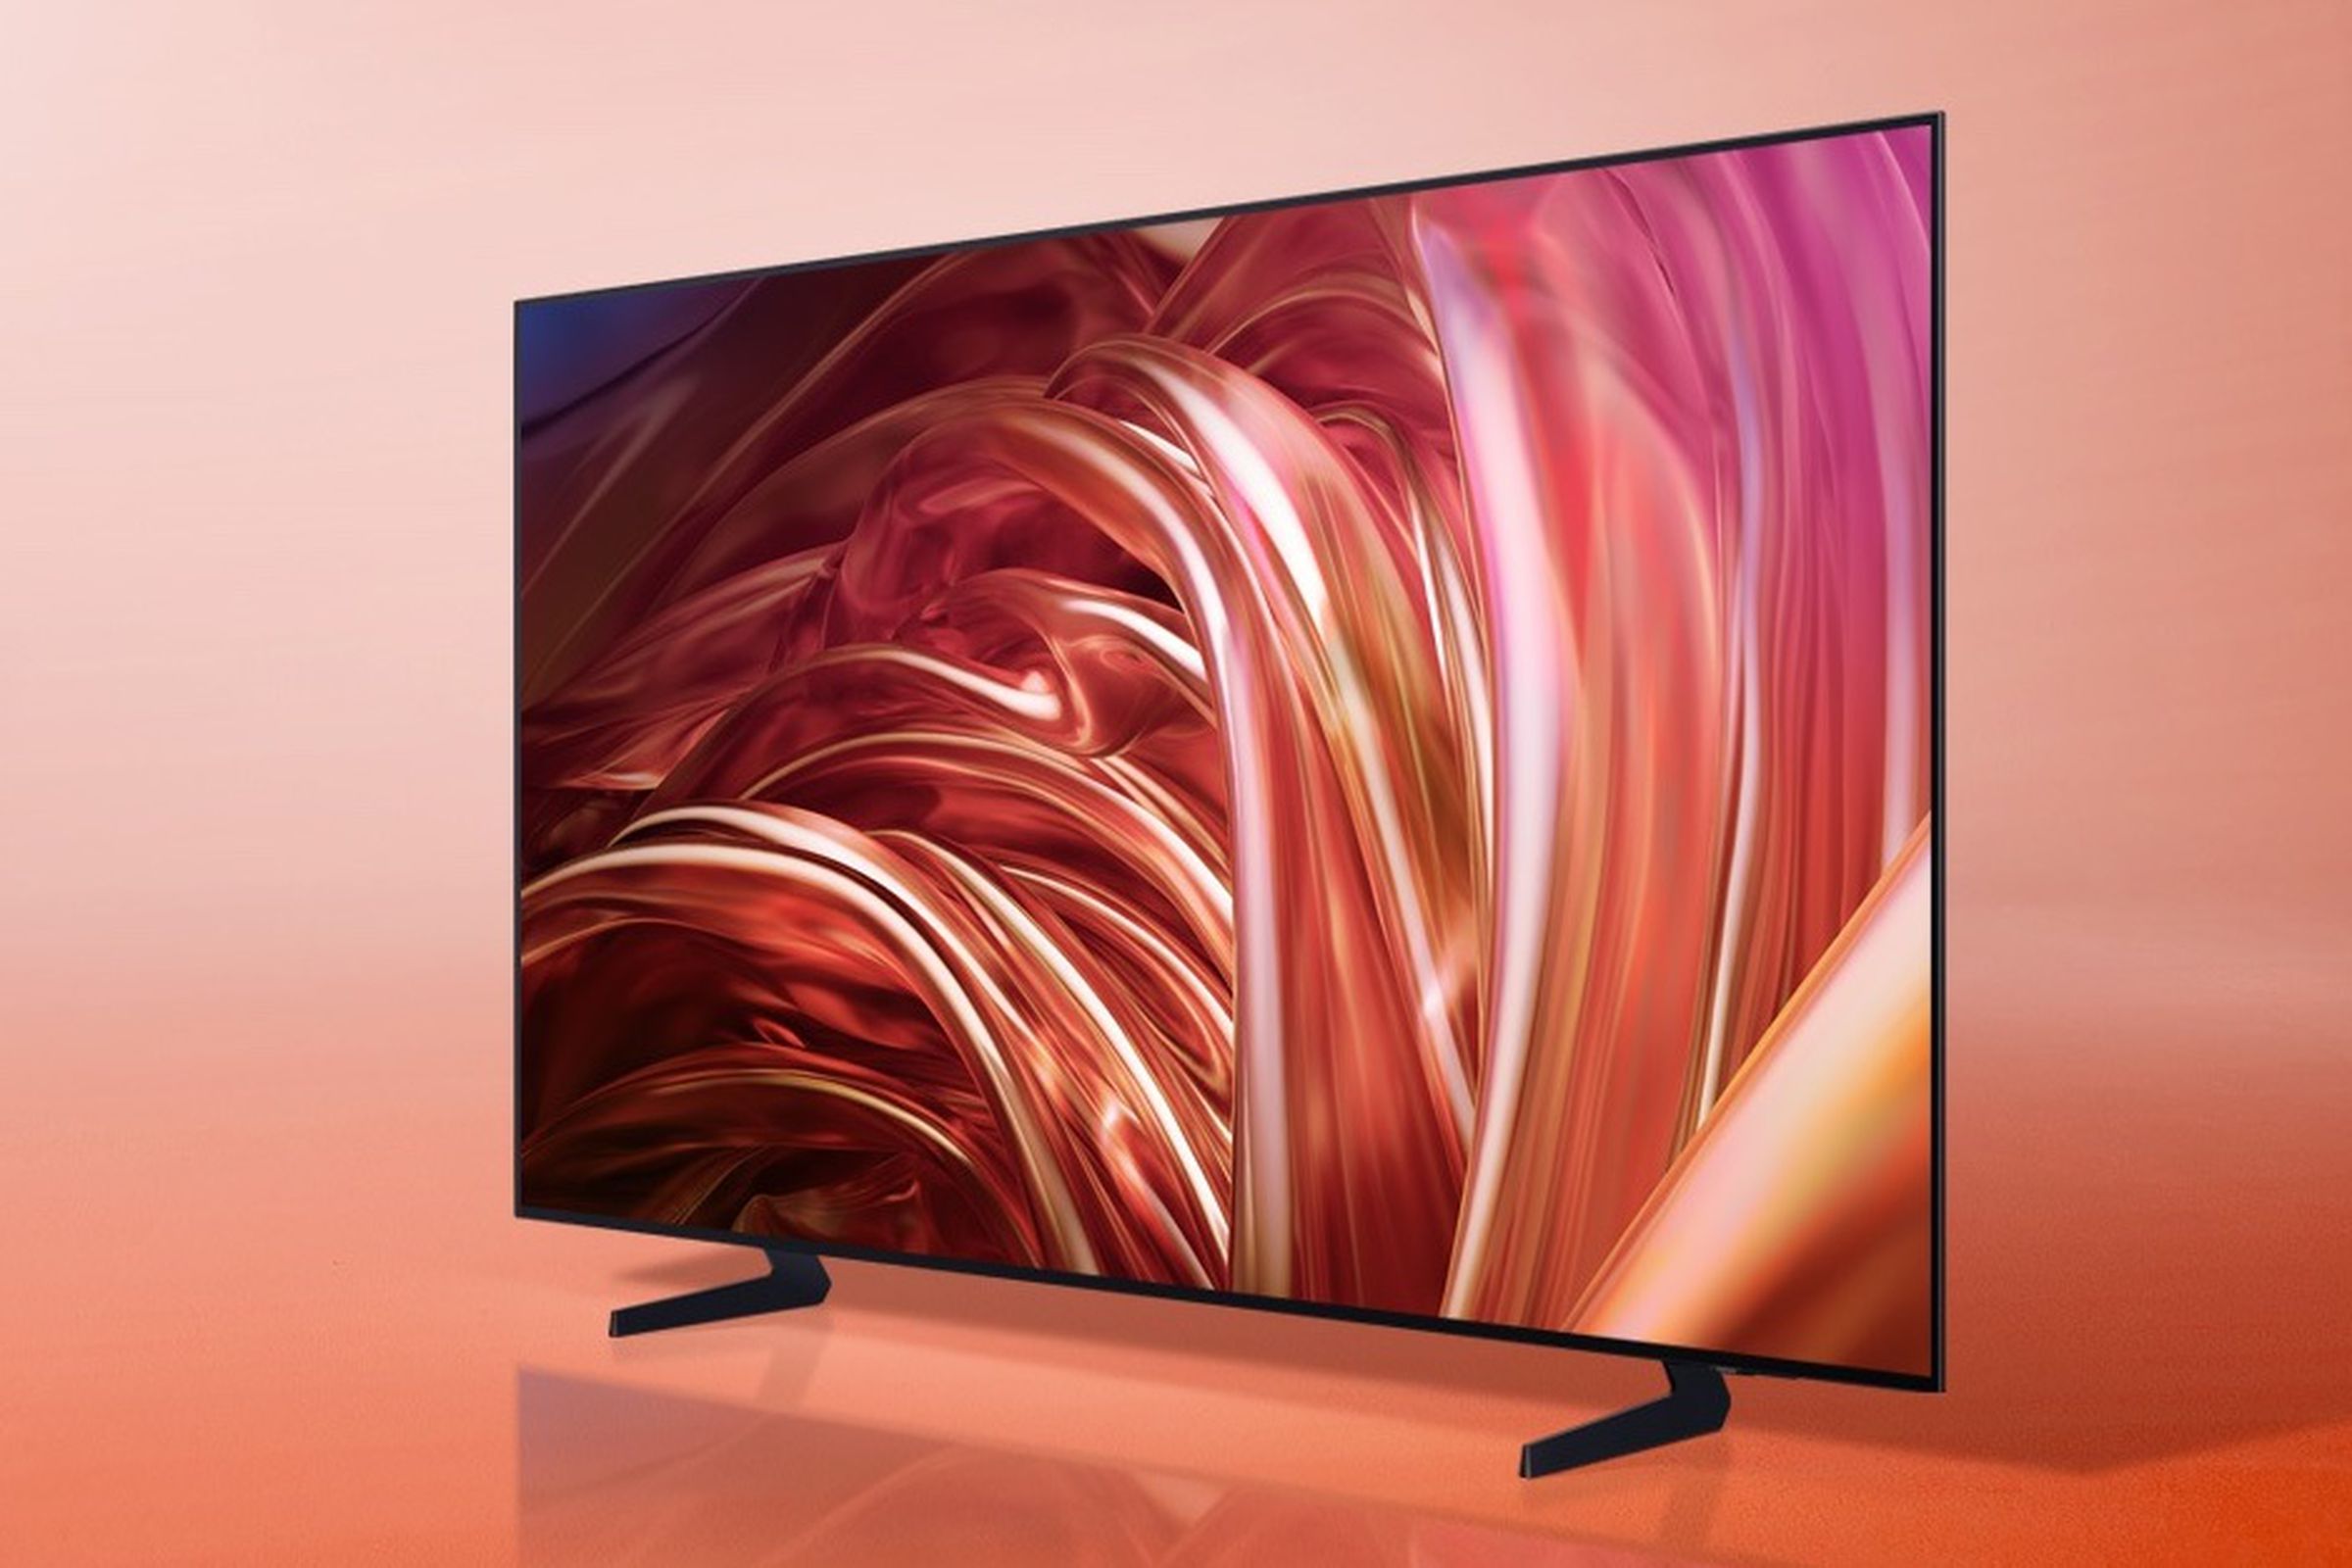 A marketing image of Samsung’s S85D OLED TV.